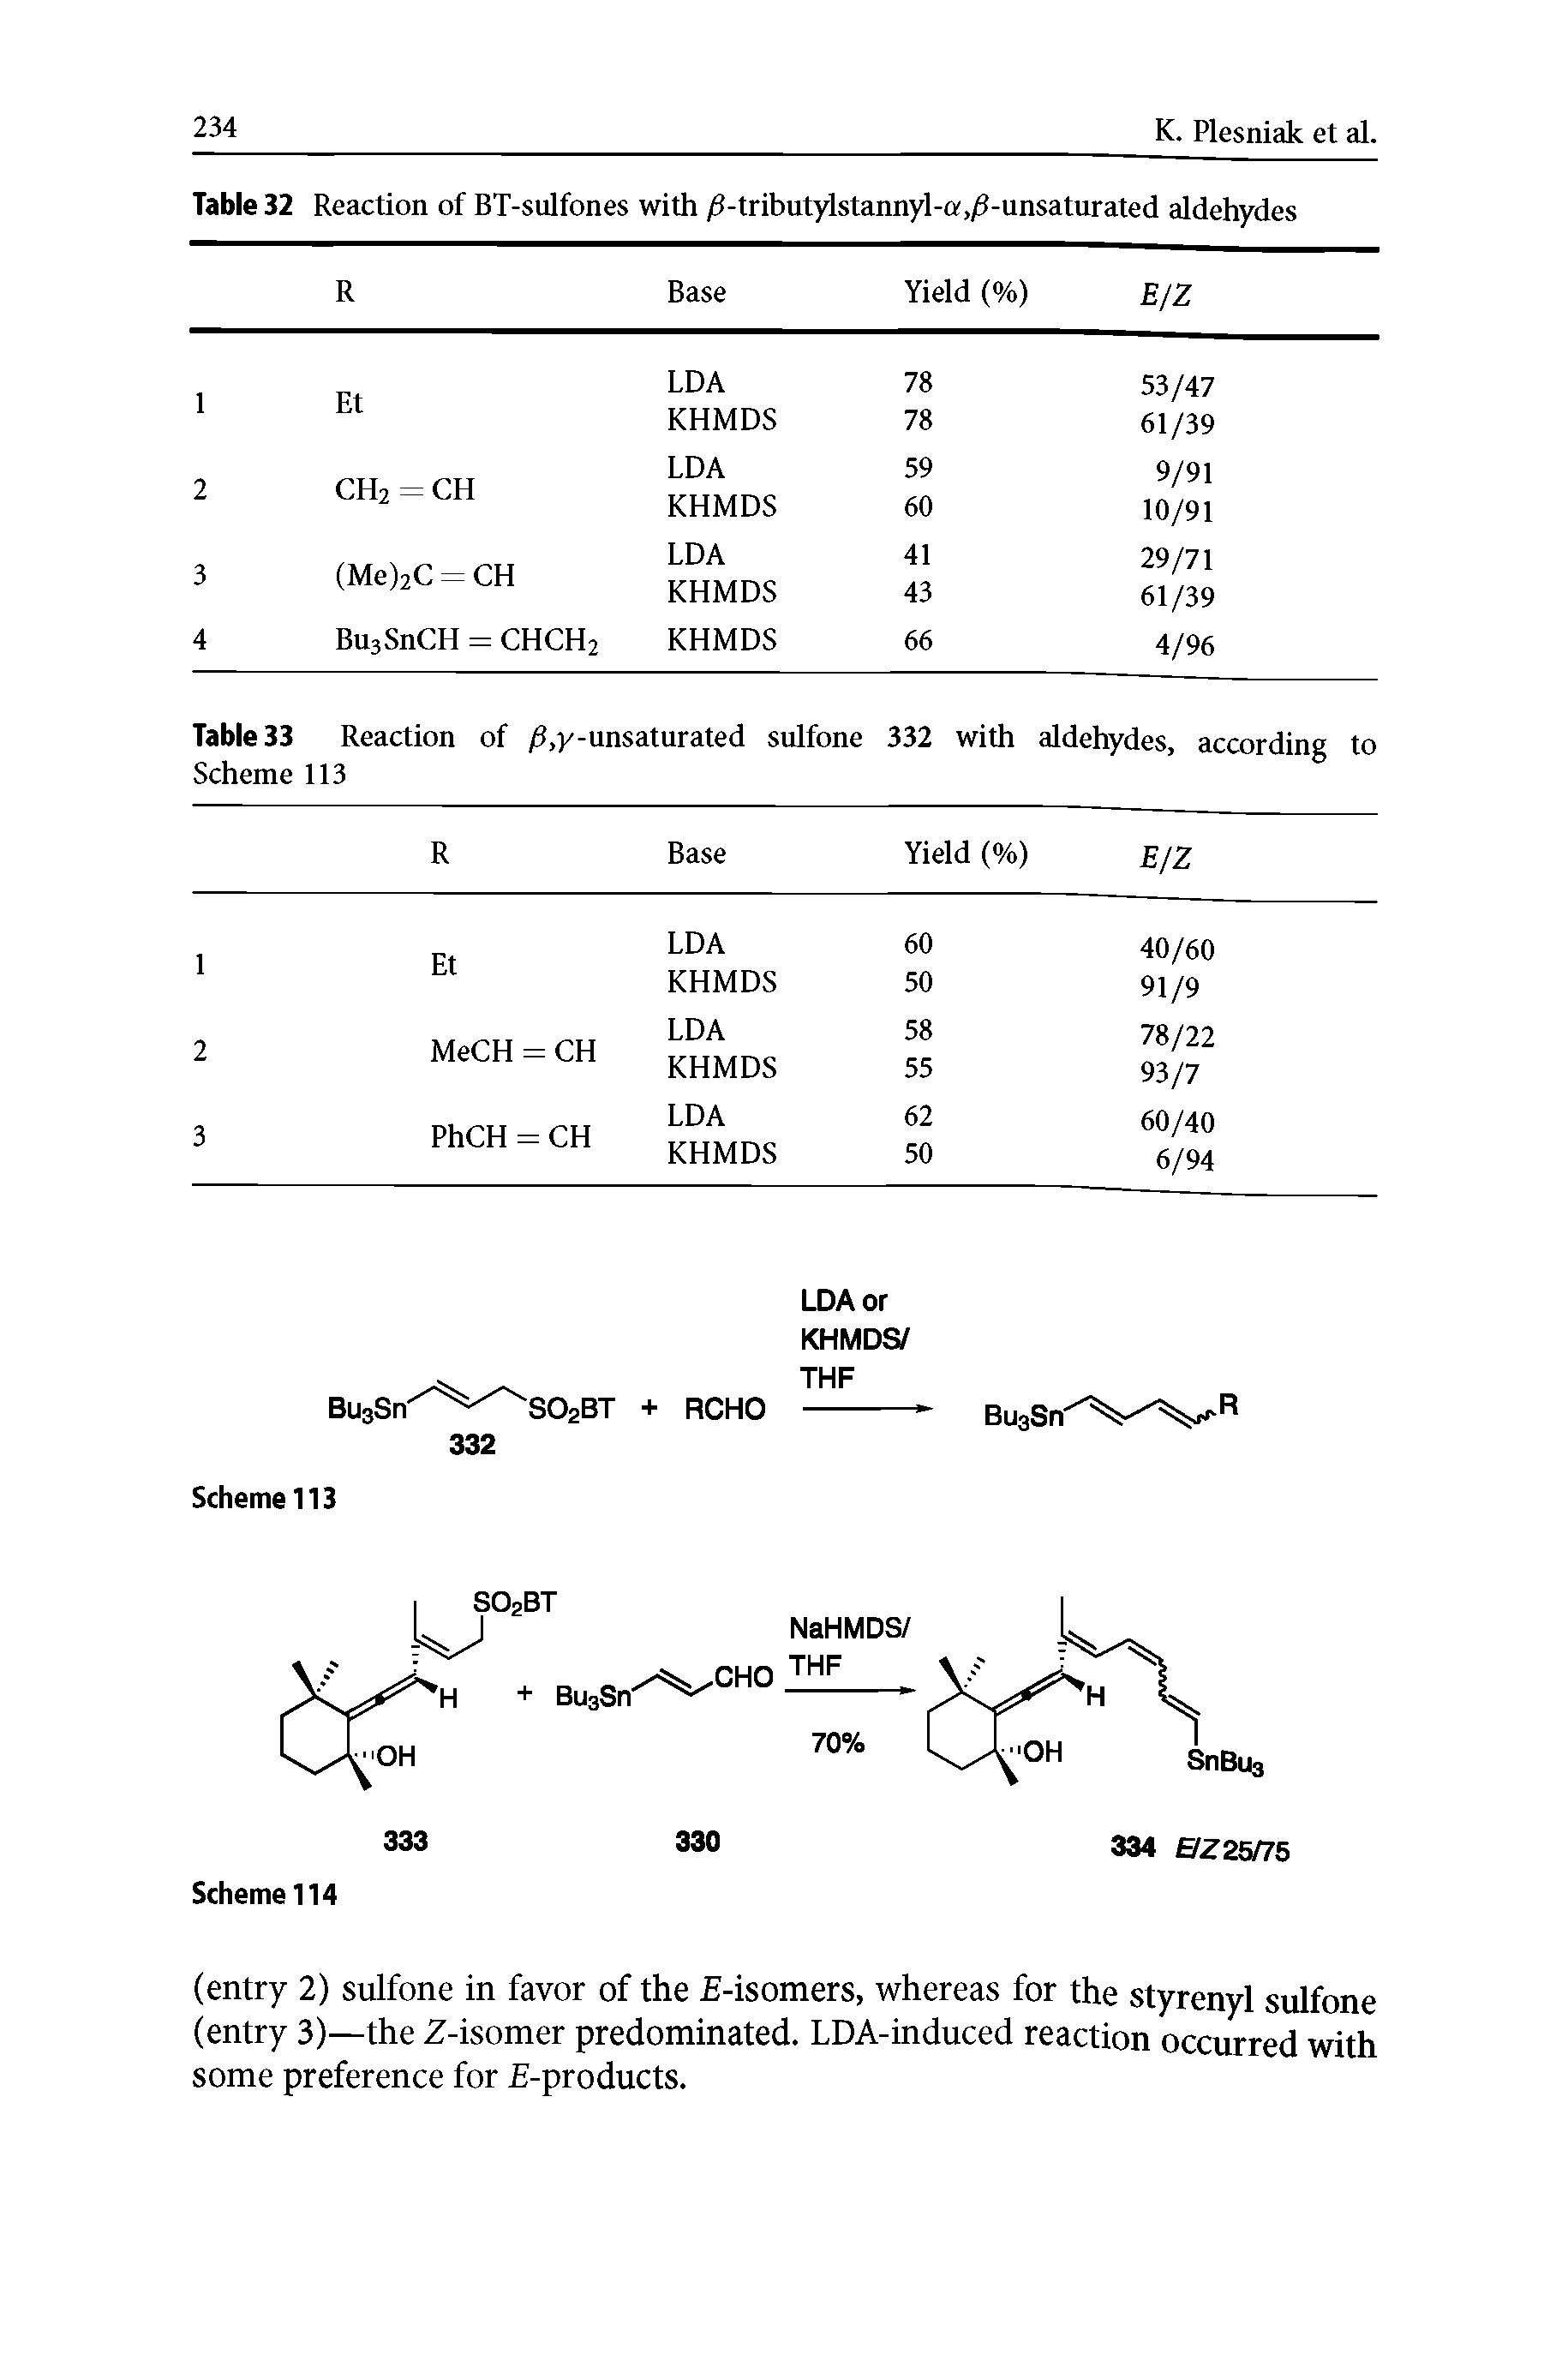 Table 33 Reaction of f ,y-unsaturated sulfone 332 with aldehydes, according to...